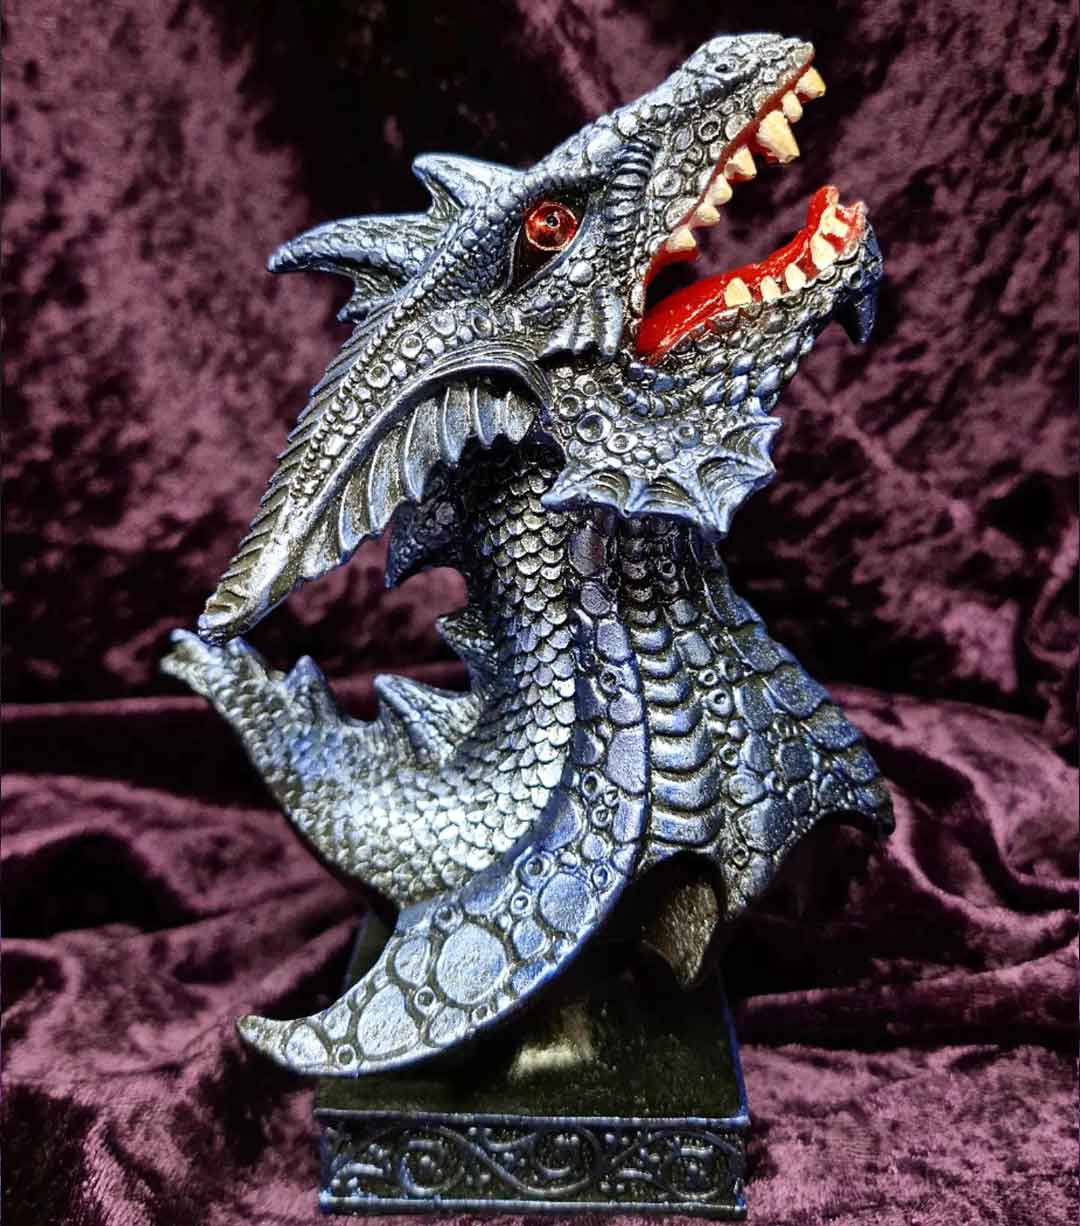 A blue dragon bust, roaring at the sky